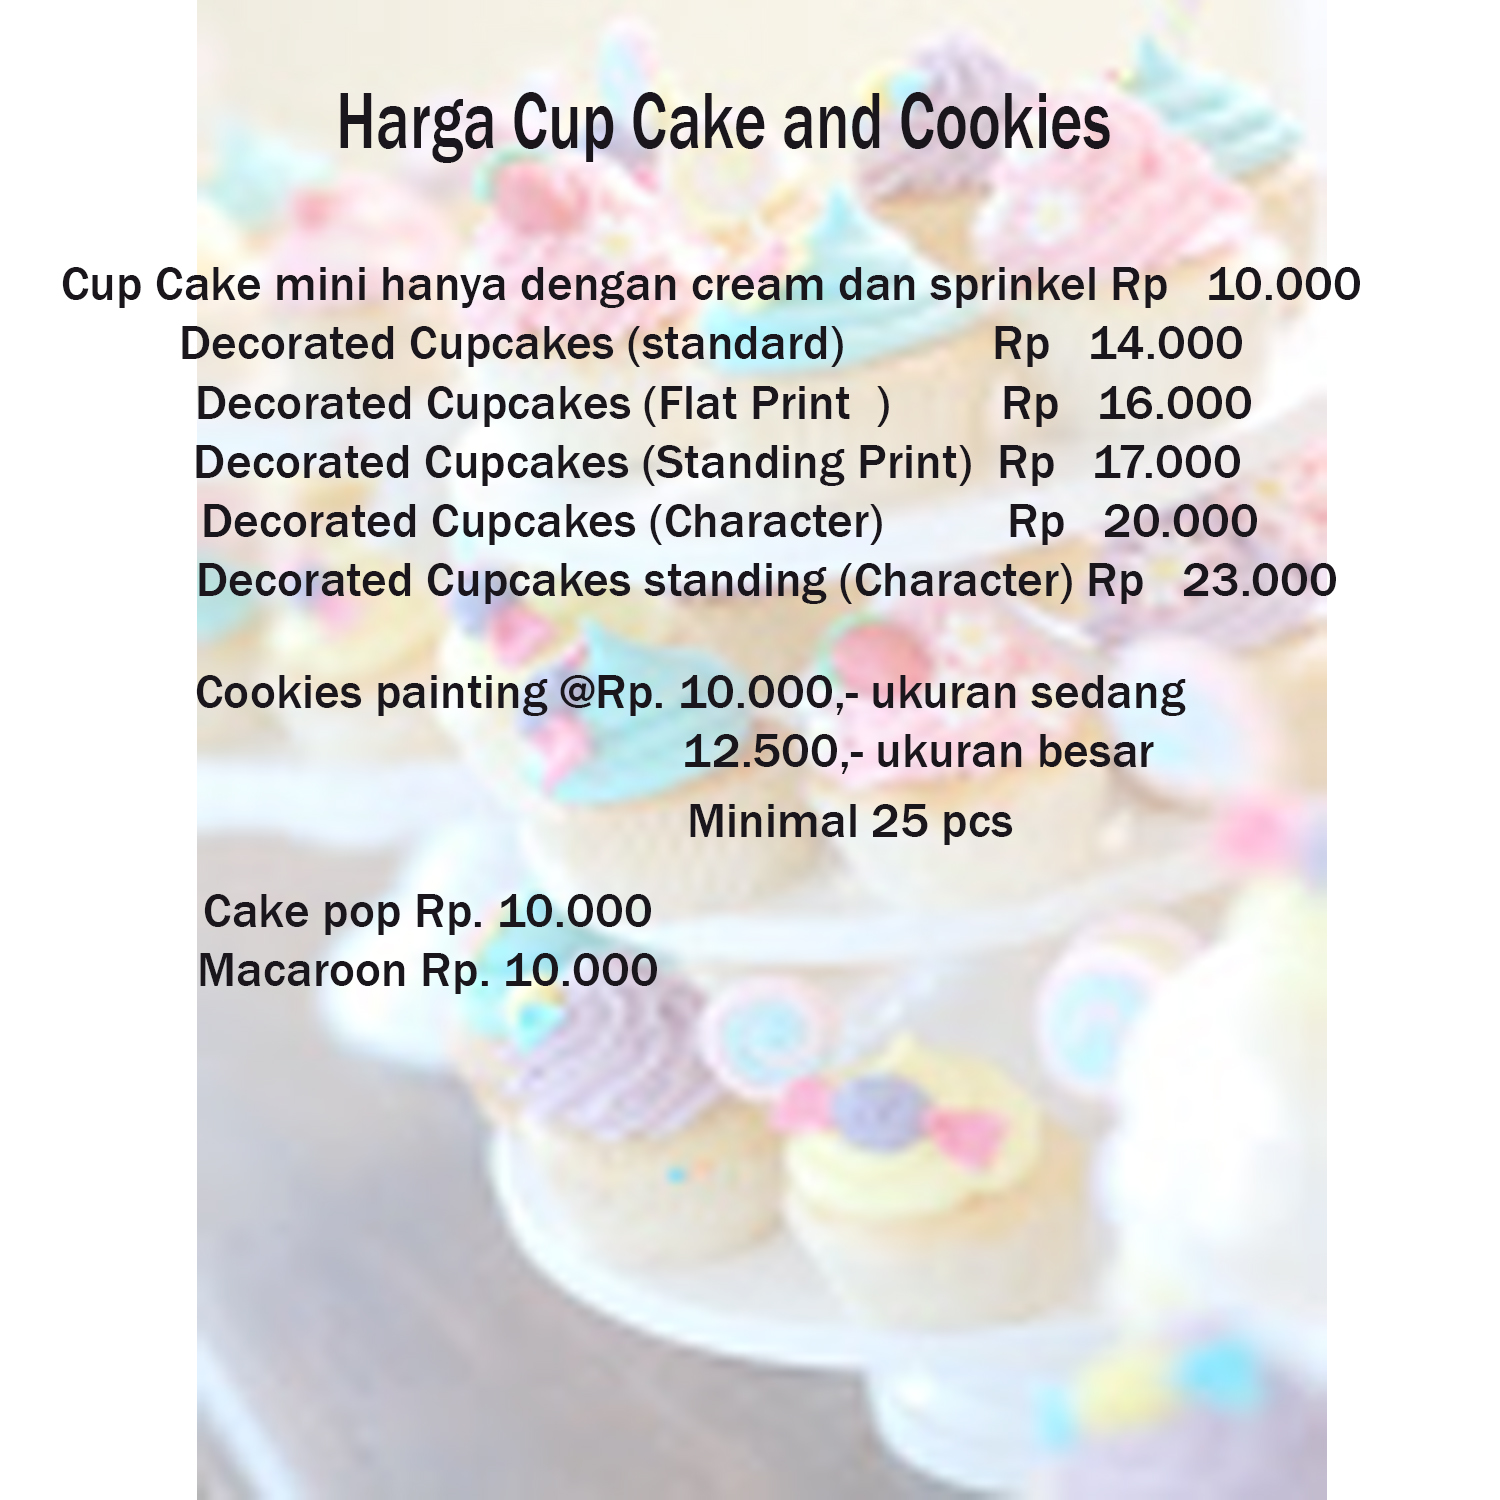 Cup cake and cookies